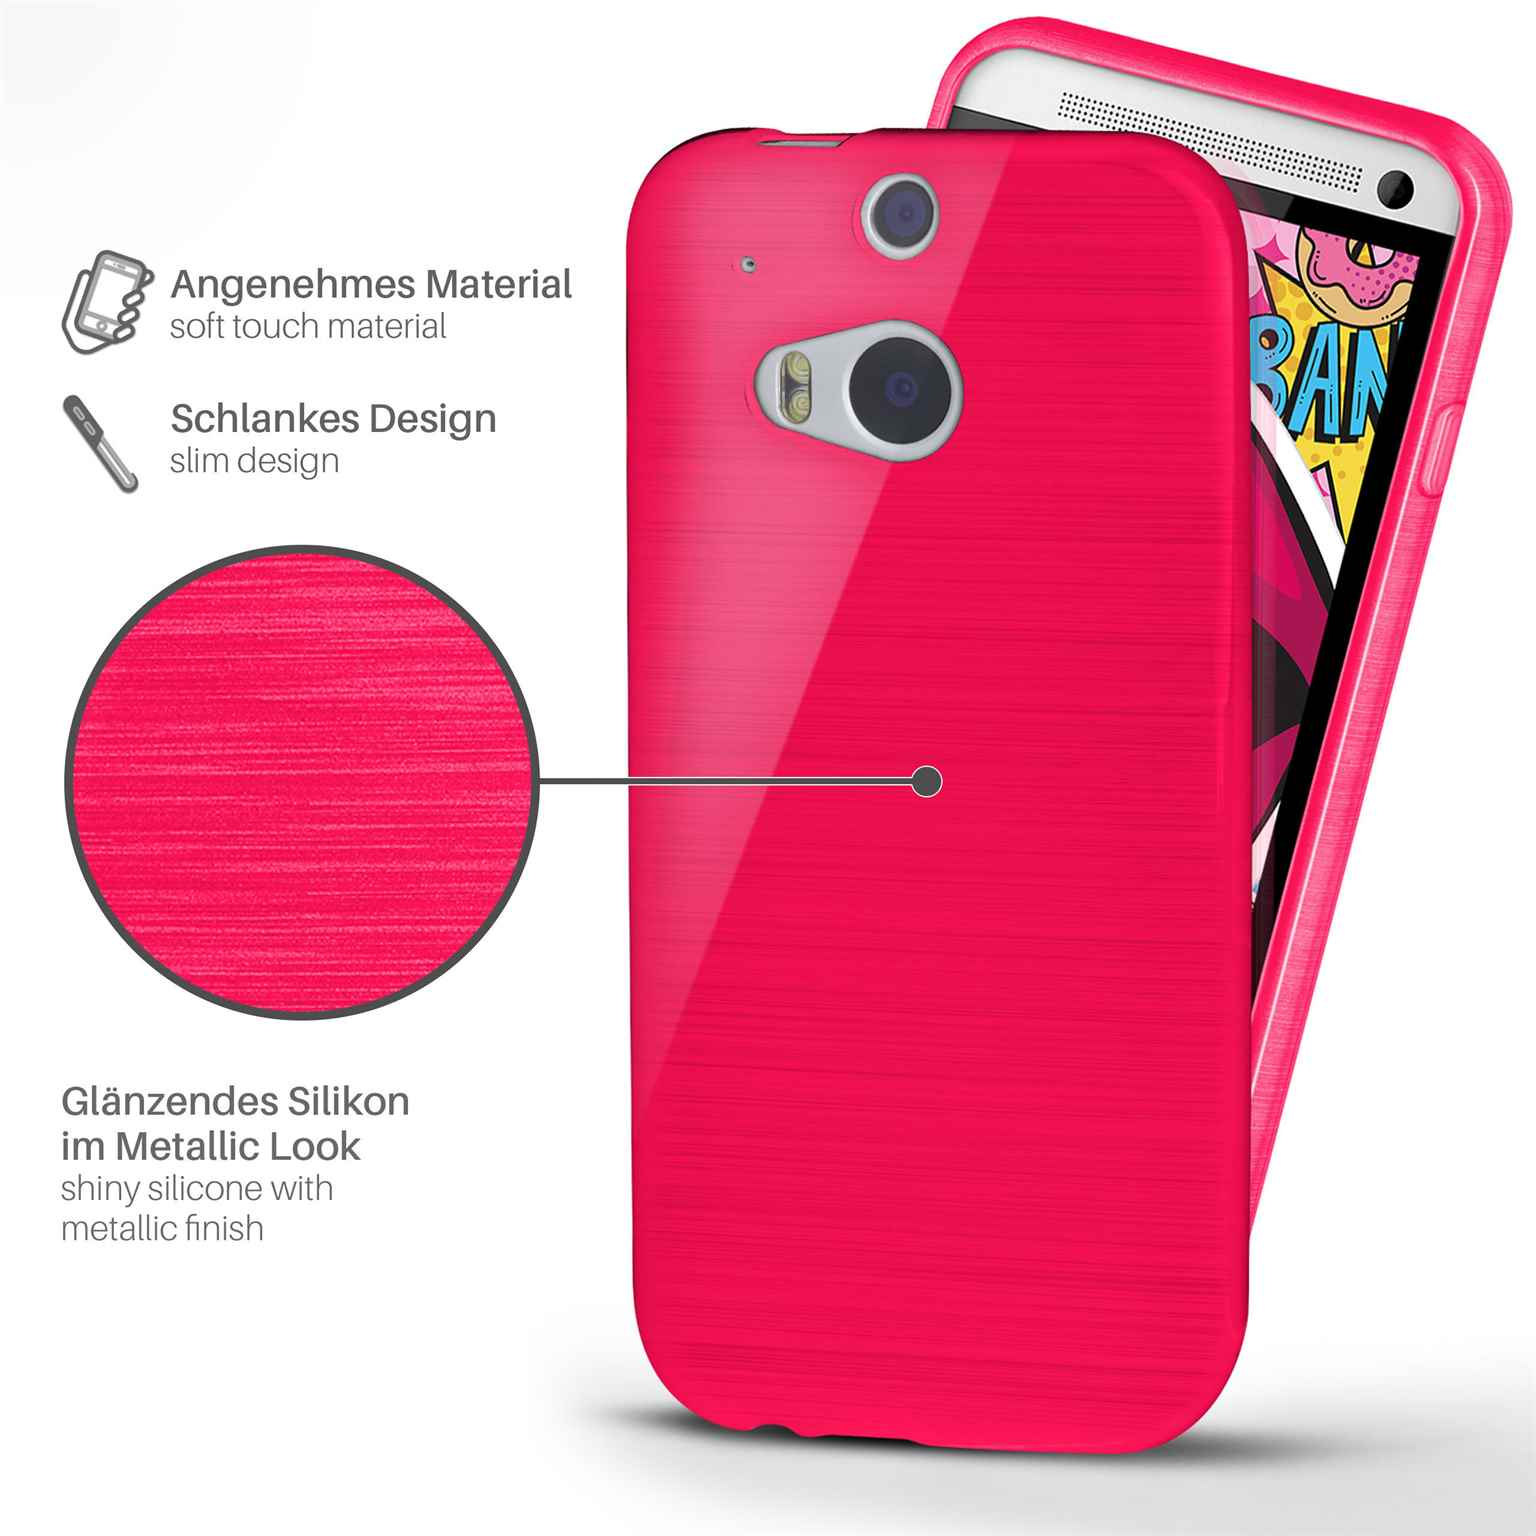 M8, HTC, Brushed One Backcover, Case, Magenta-Pink MOEX